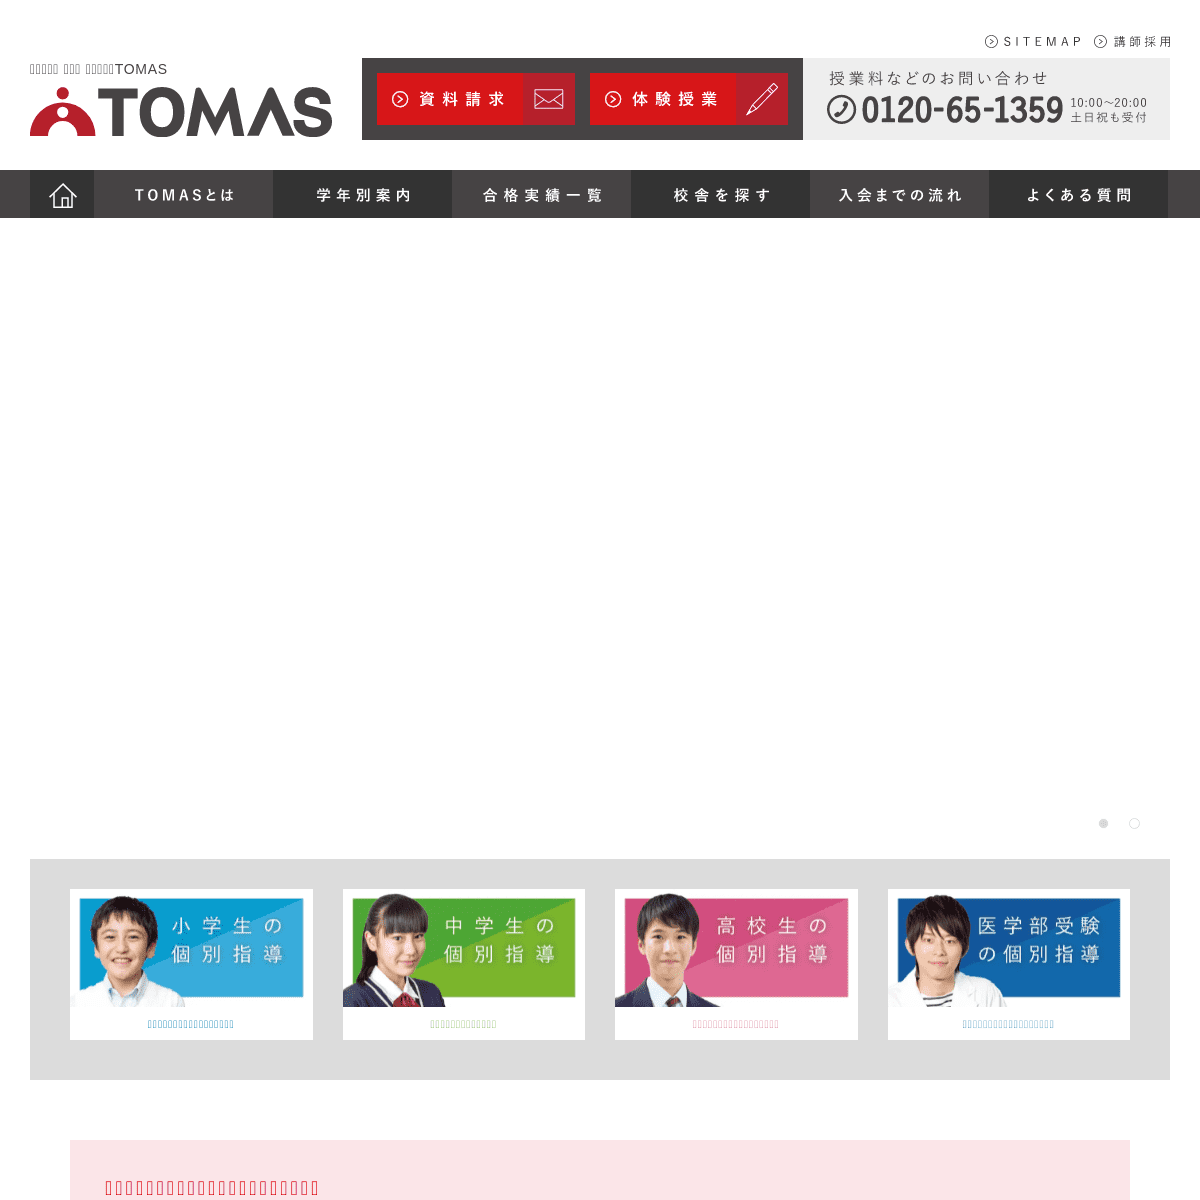 A complete backup of https://tomas.co.jp